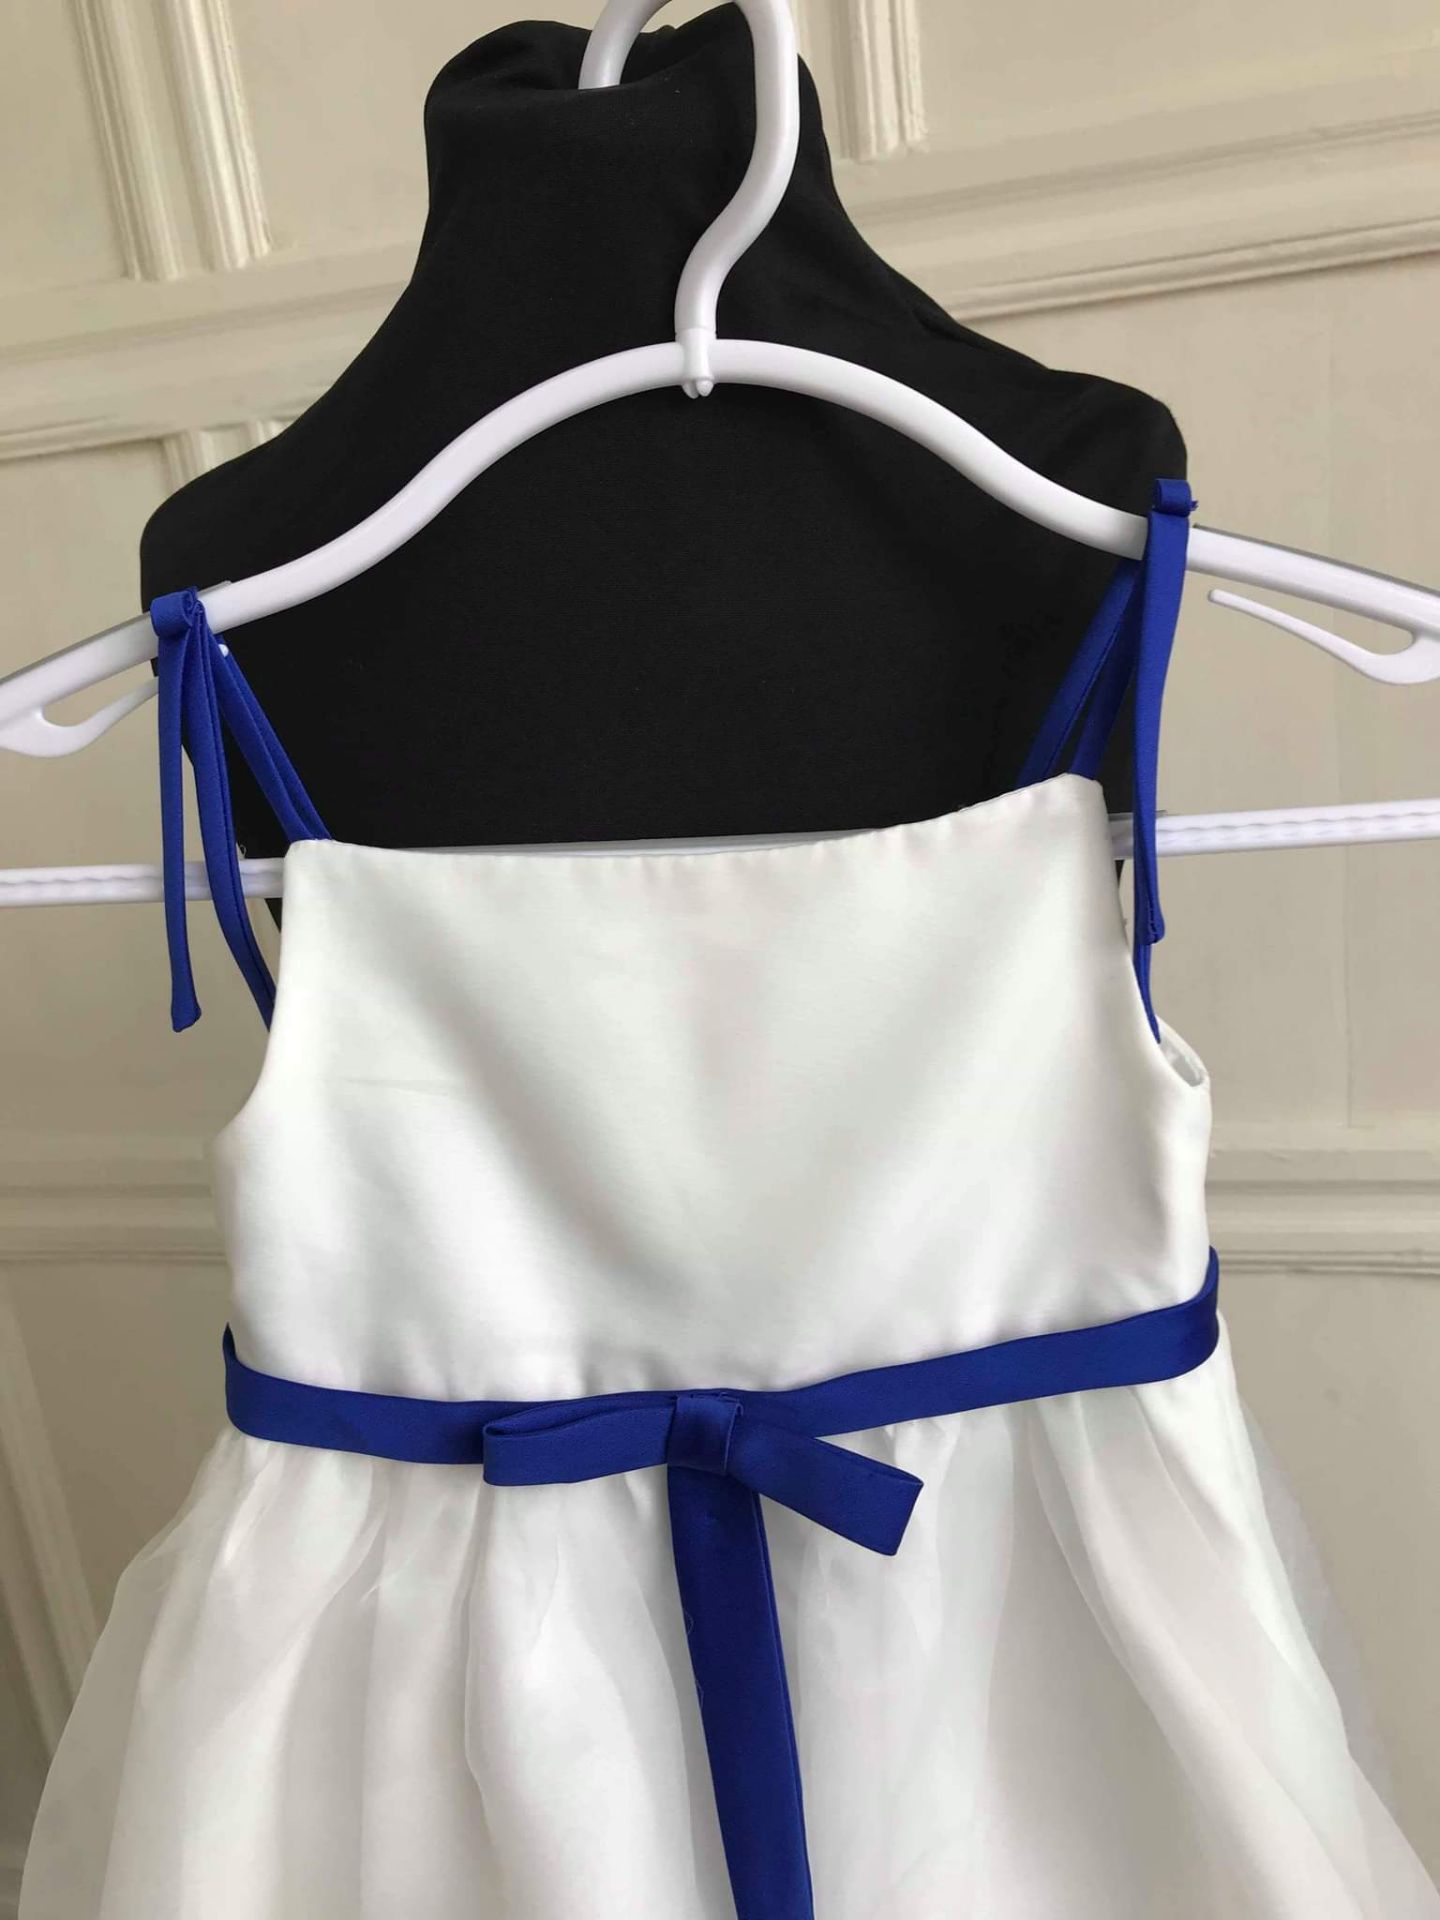 Ivory Flowergirl Dress With Cobalt Blue Straps and Belt - Image 9 of 9